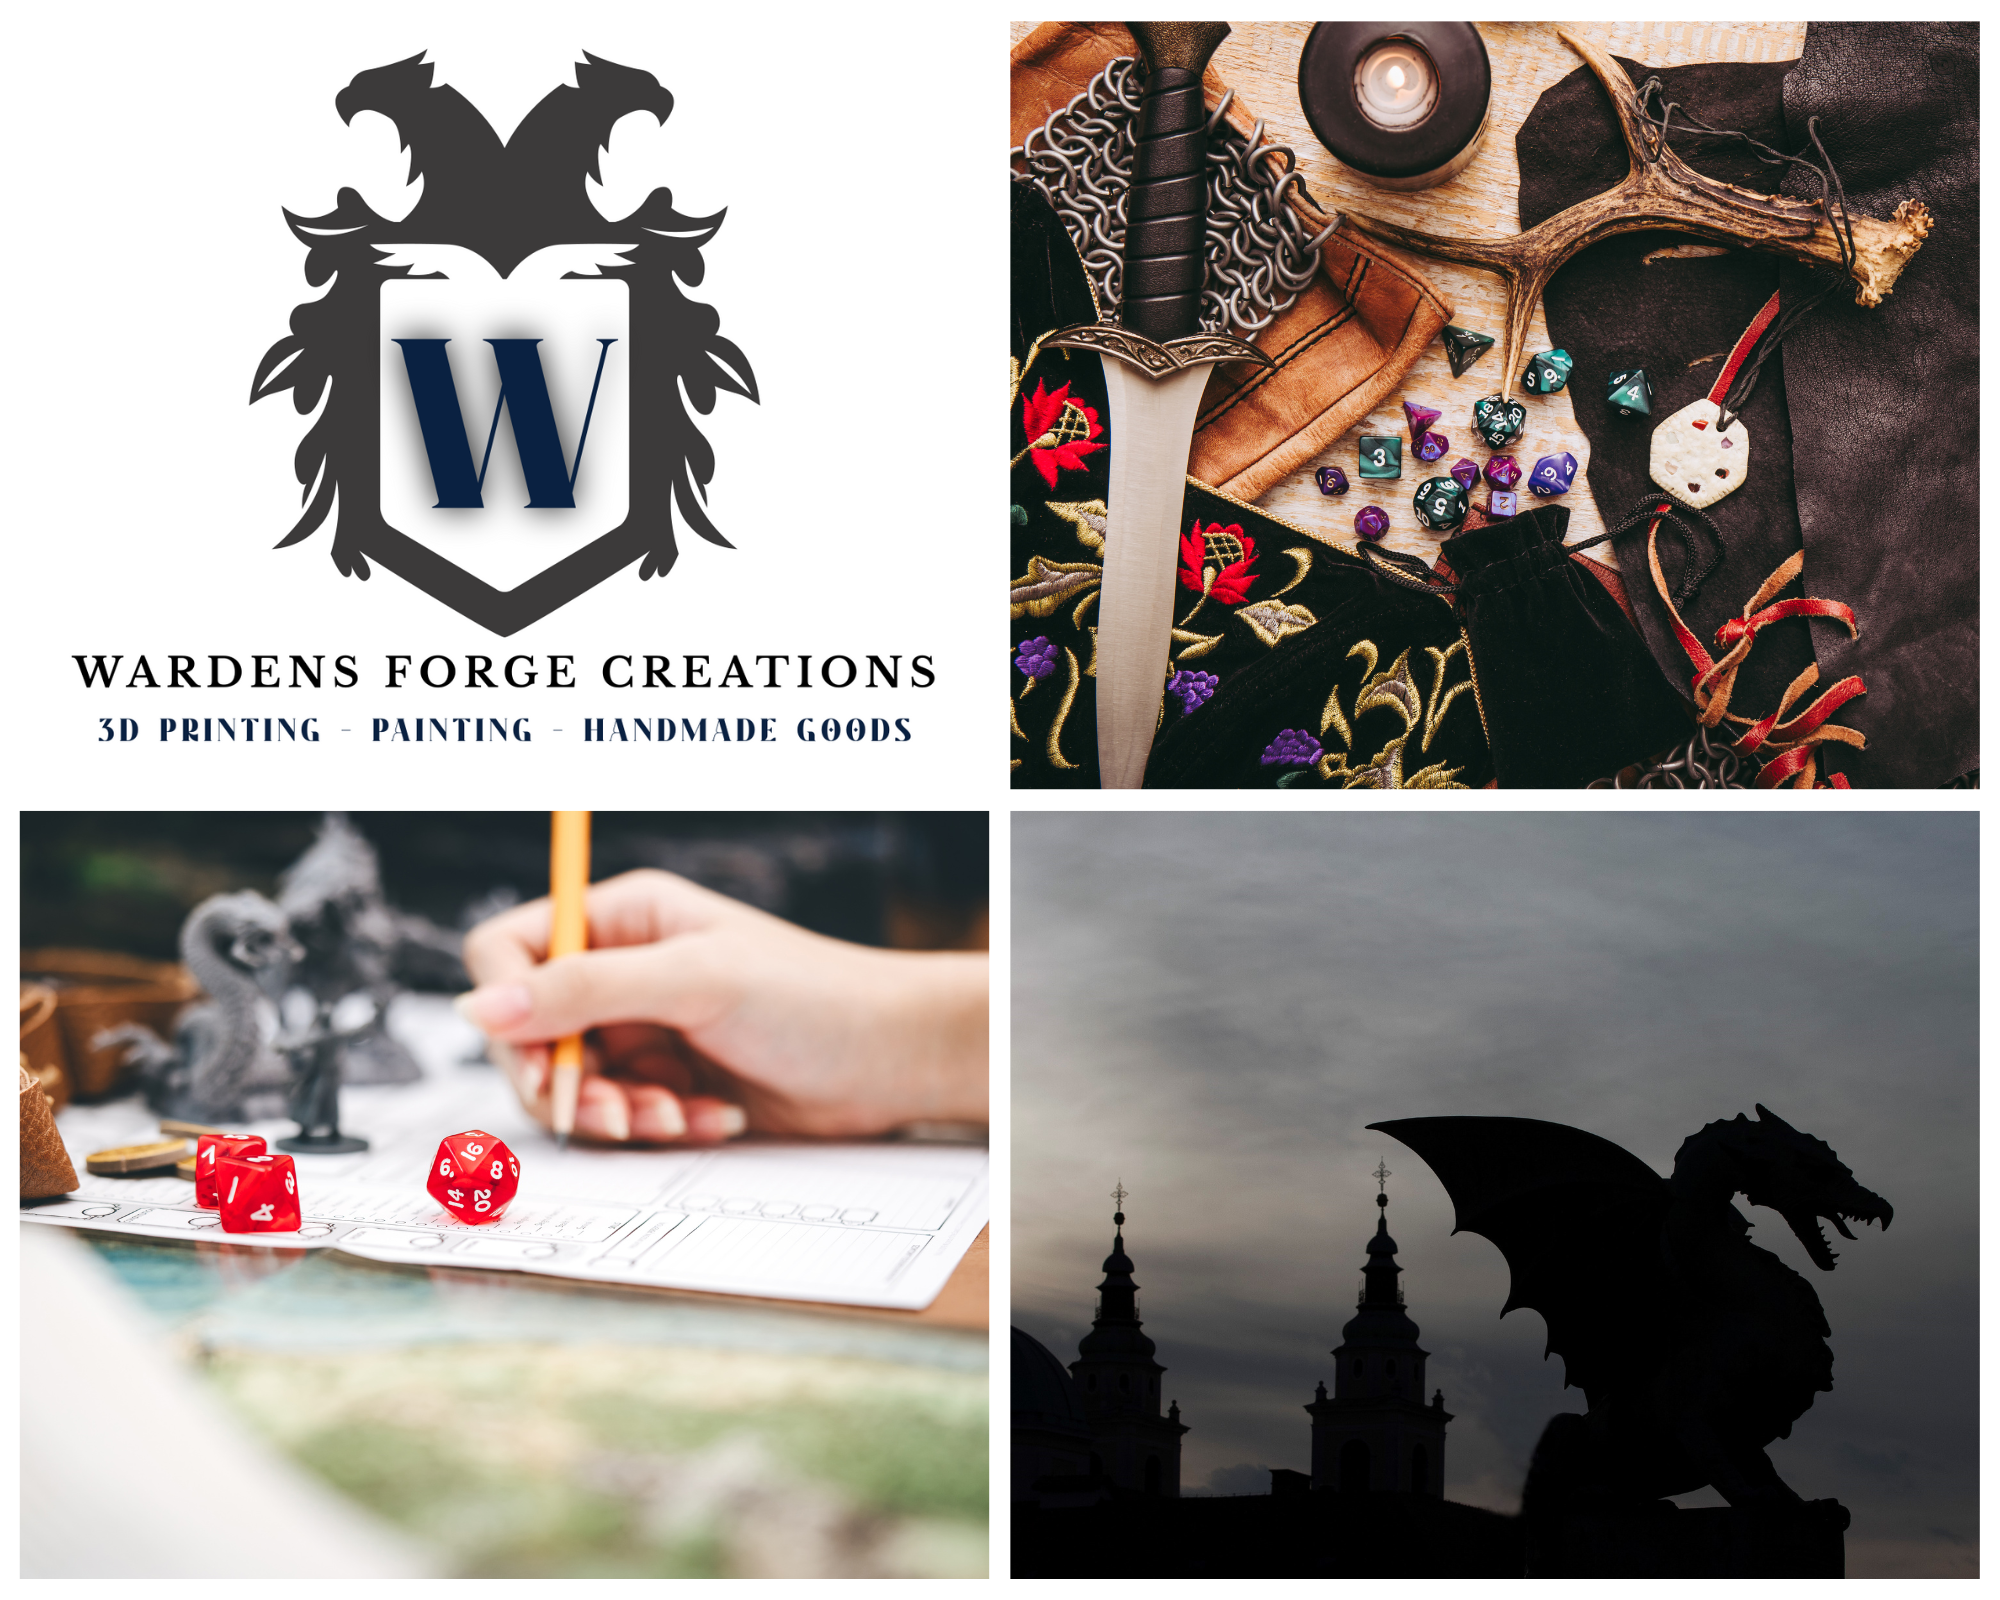 Wardens Forge Stock Photo Company Services Example Dragon, RPG Games